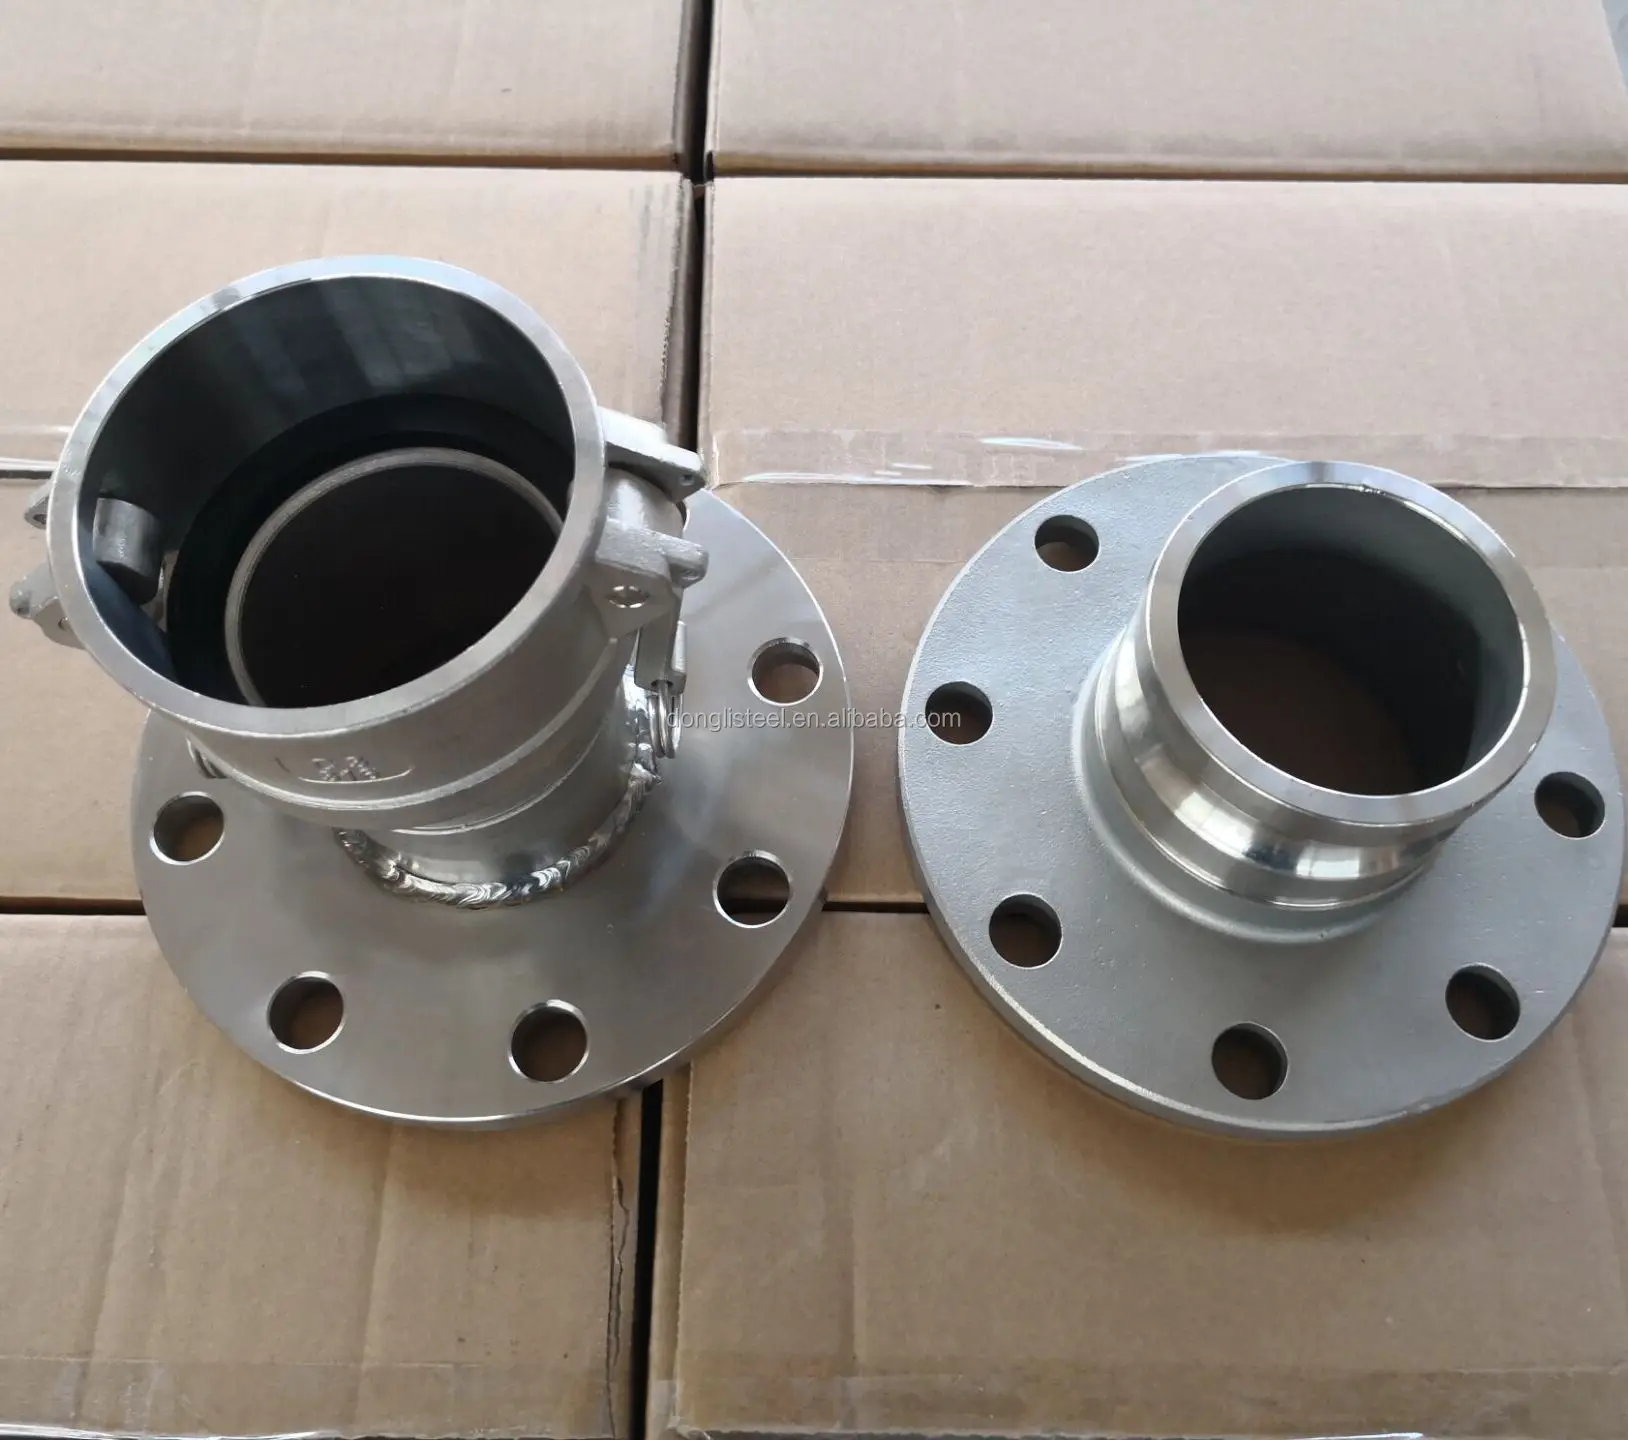 China Manufacturing Stainless Steel Camlock Coupling Flange Type Fa ...